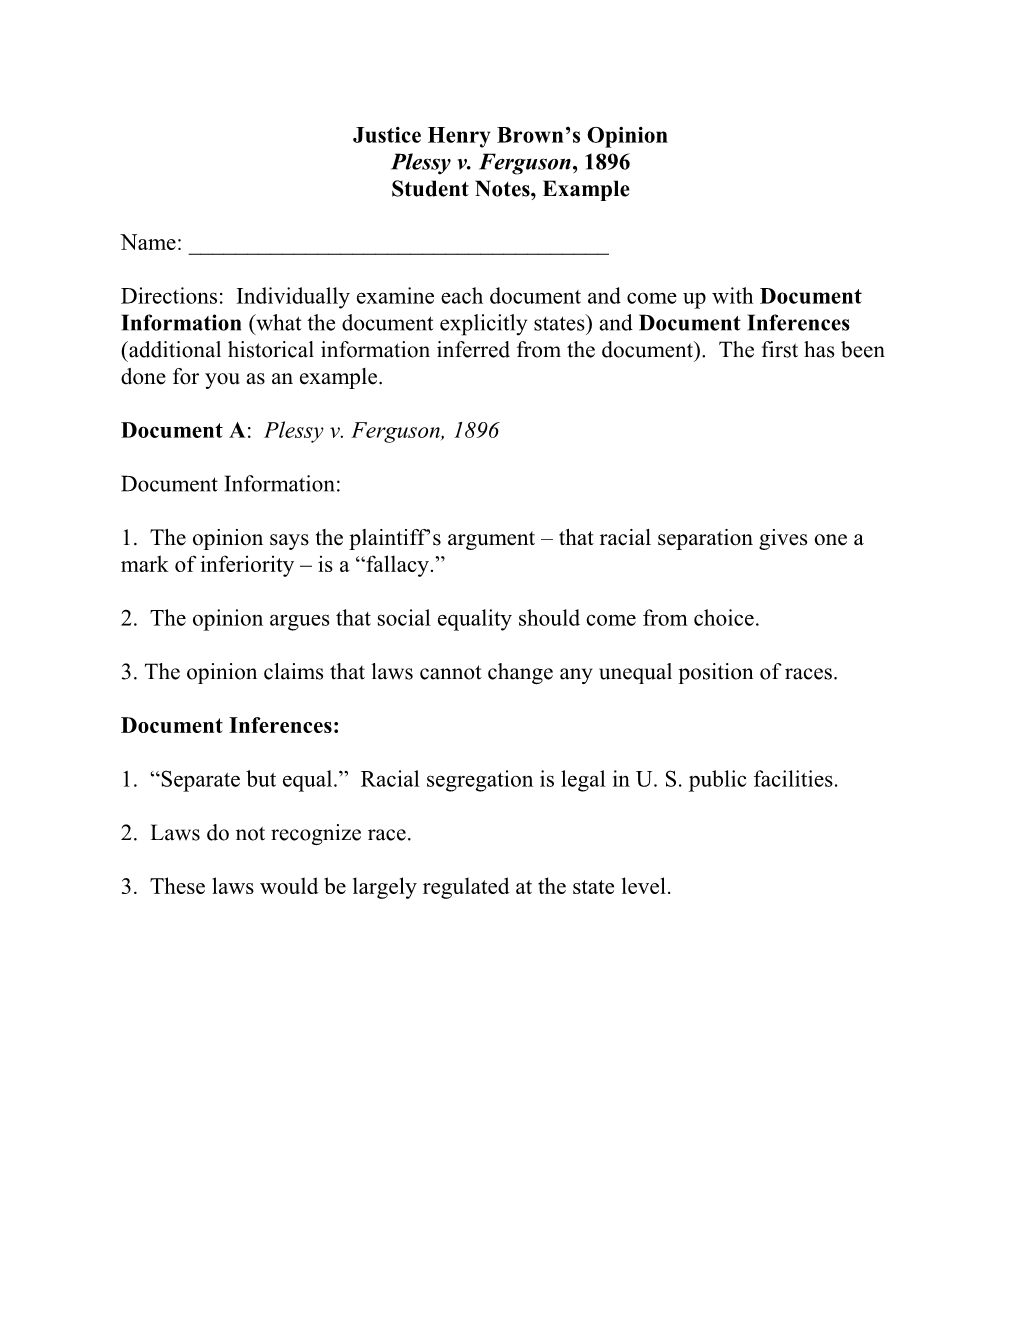 Justice Henry Brown’S Opinion Student Sample Justice Browns Opinion